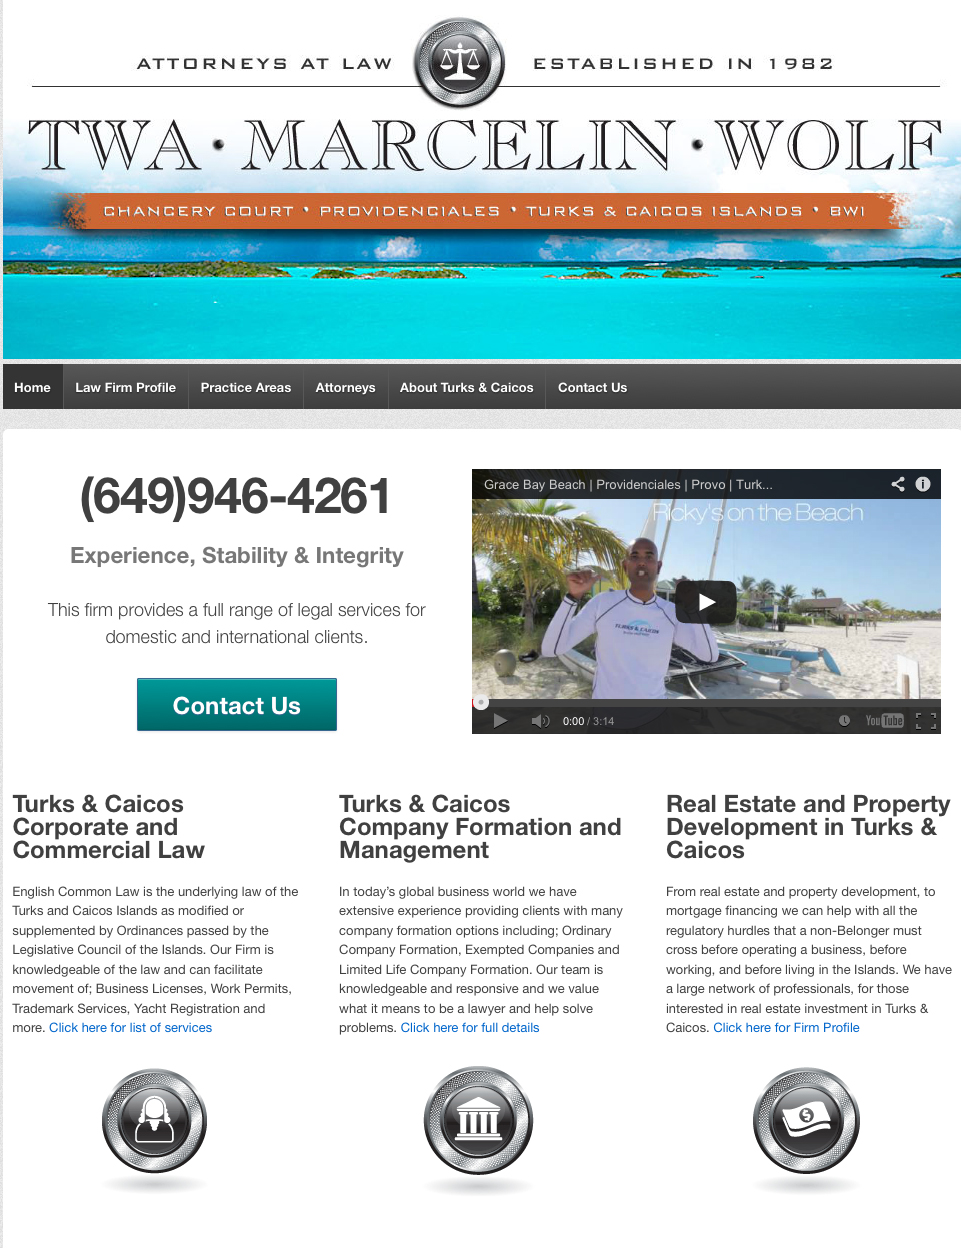 Law firm website redesign